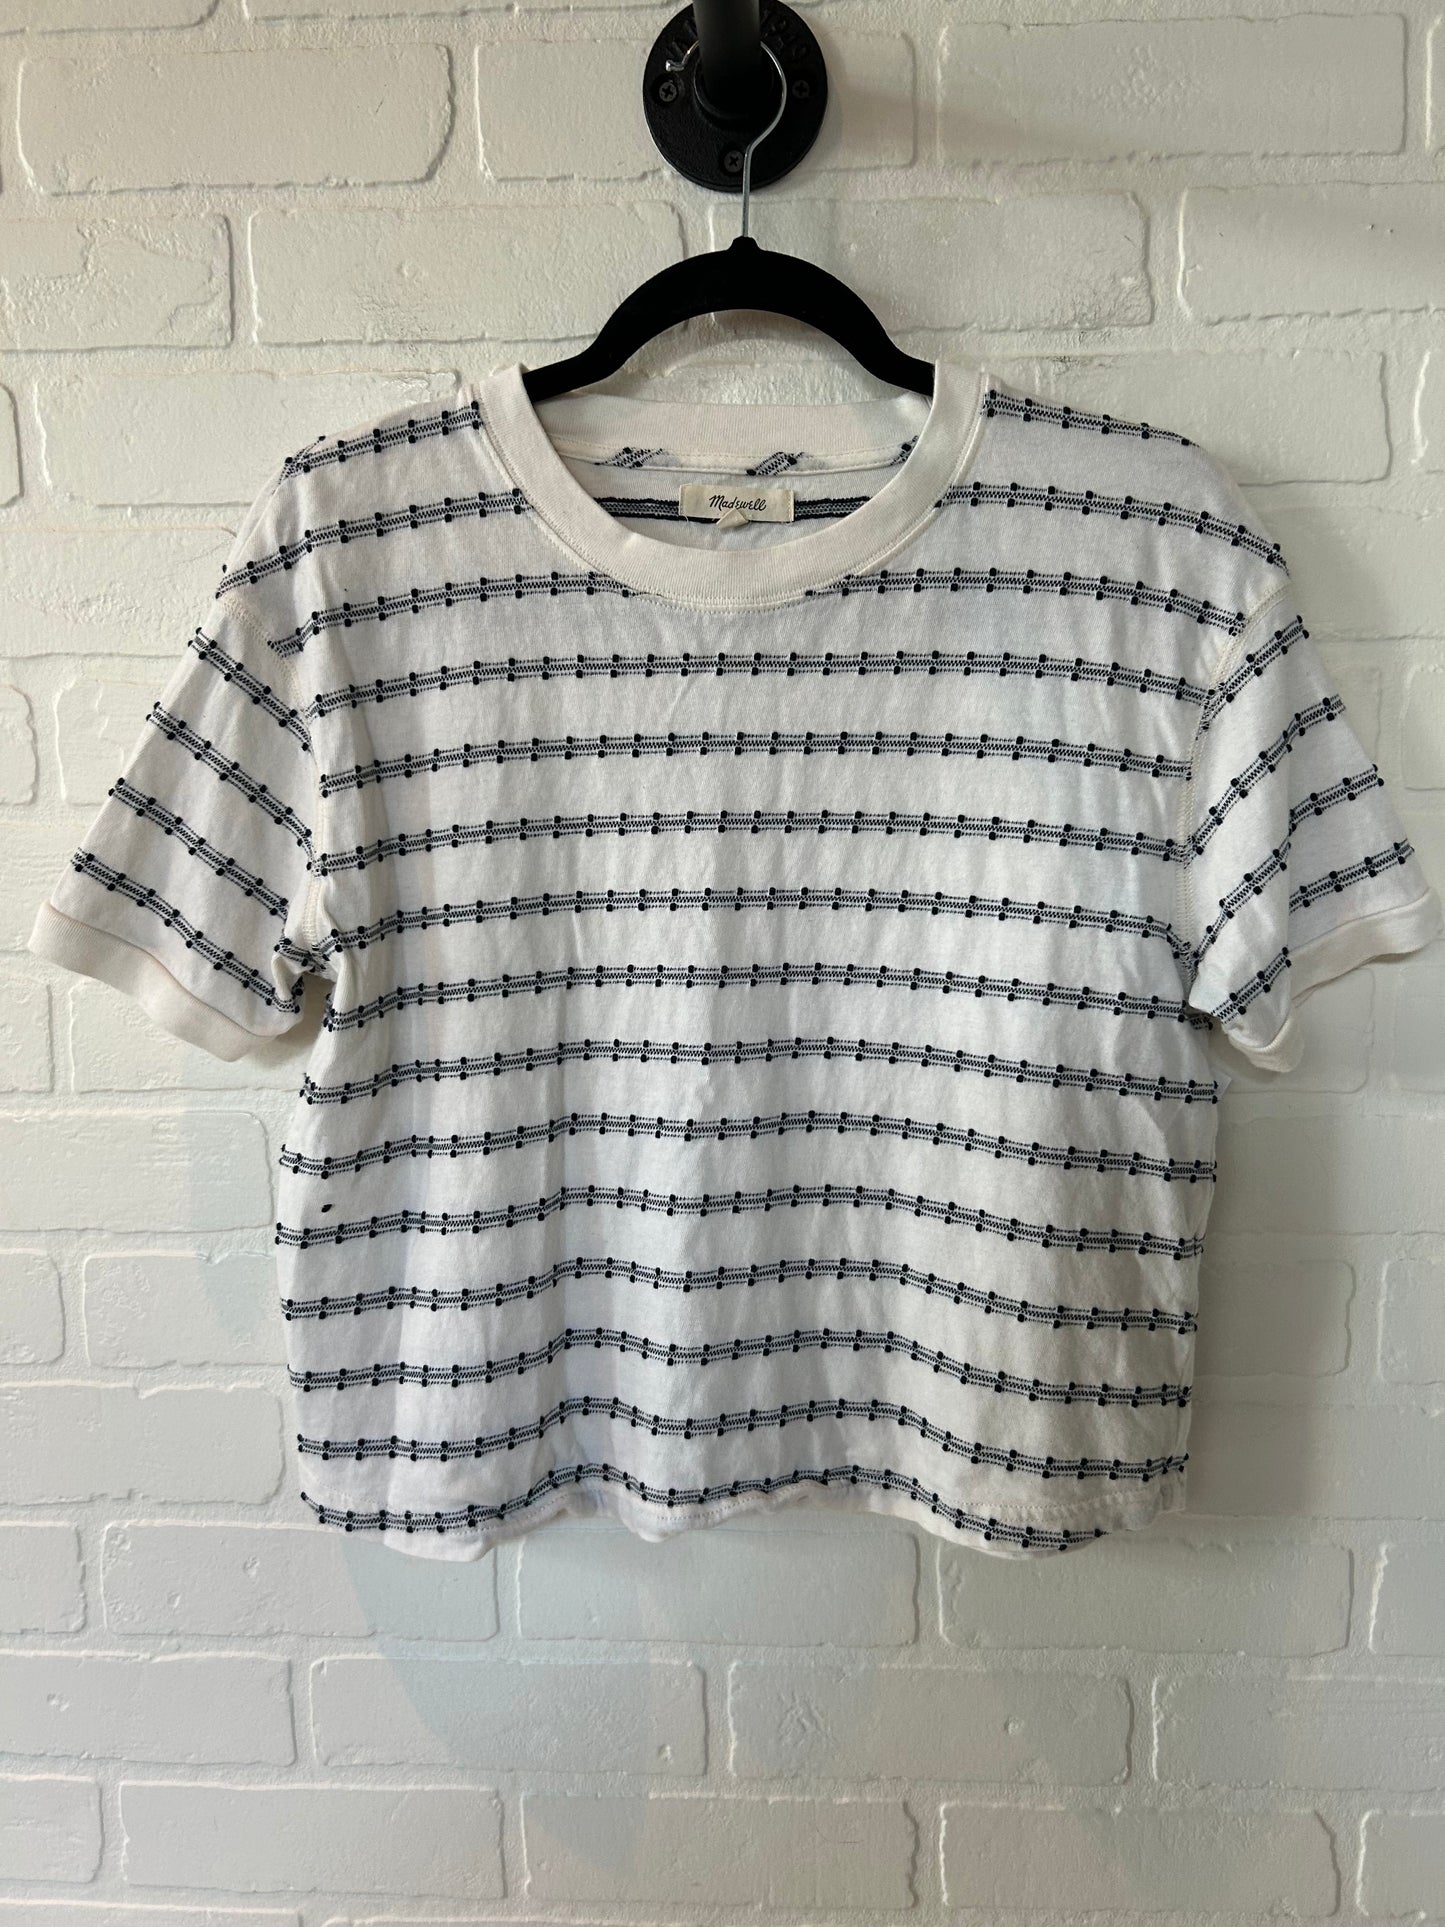 Blue & White Top Short Sleeve Madewell, Size S